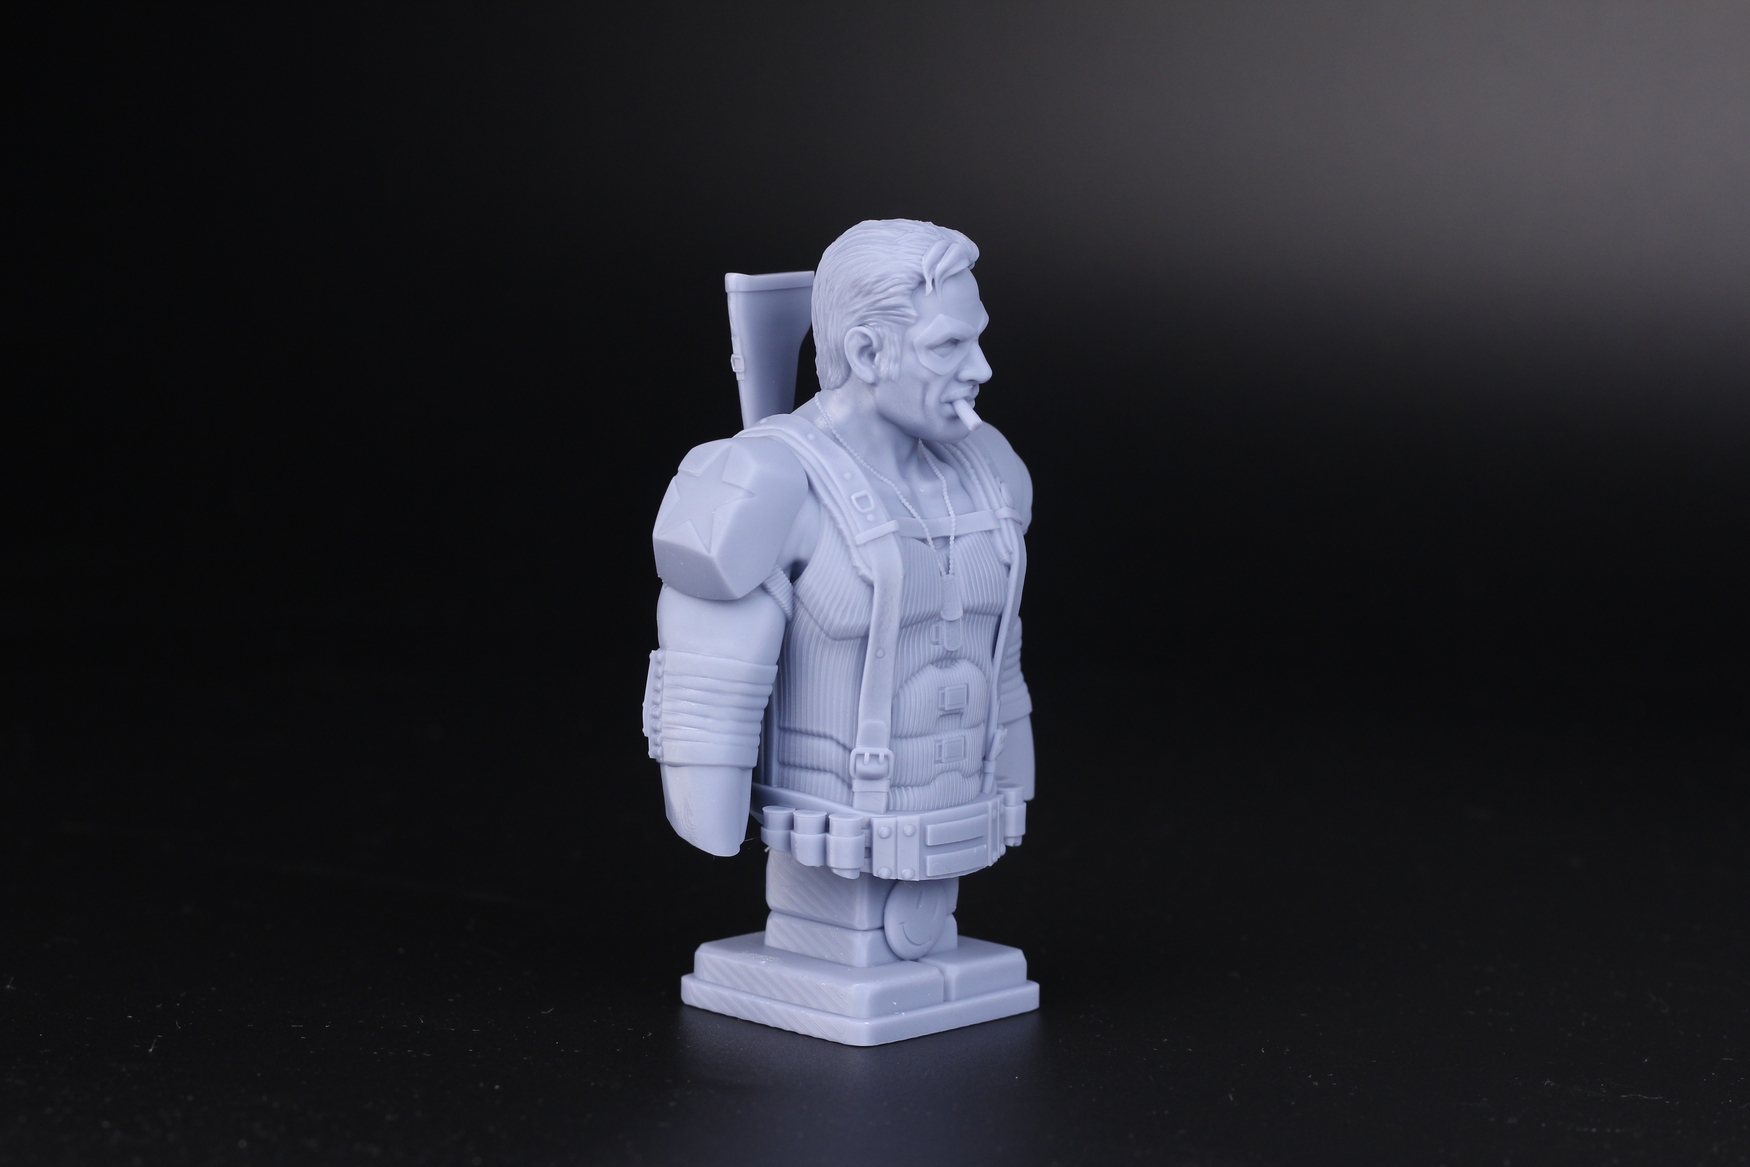 Anycubic M3 Review The Comedian bust form Fotis Mint2 | Anycubic Photon M3 Review: Bridging the gap